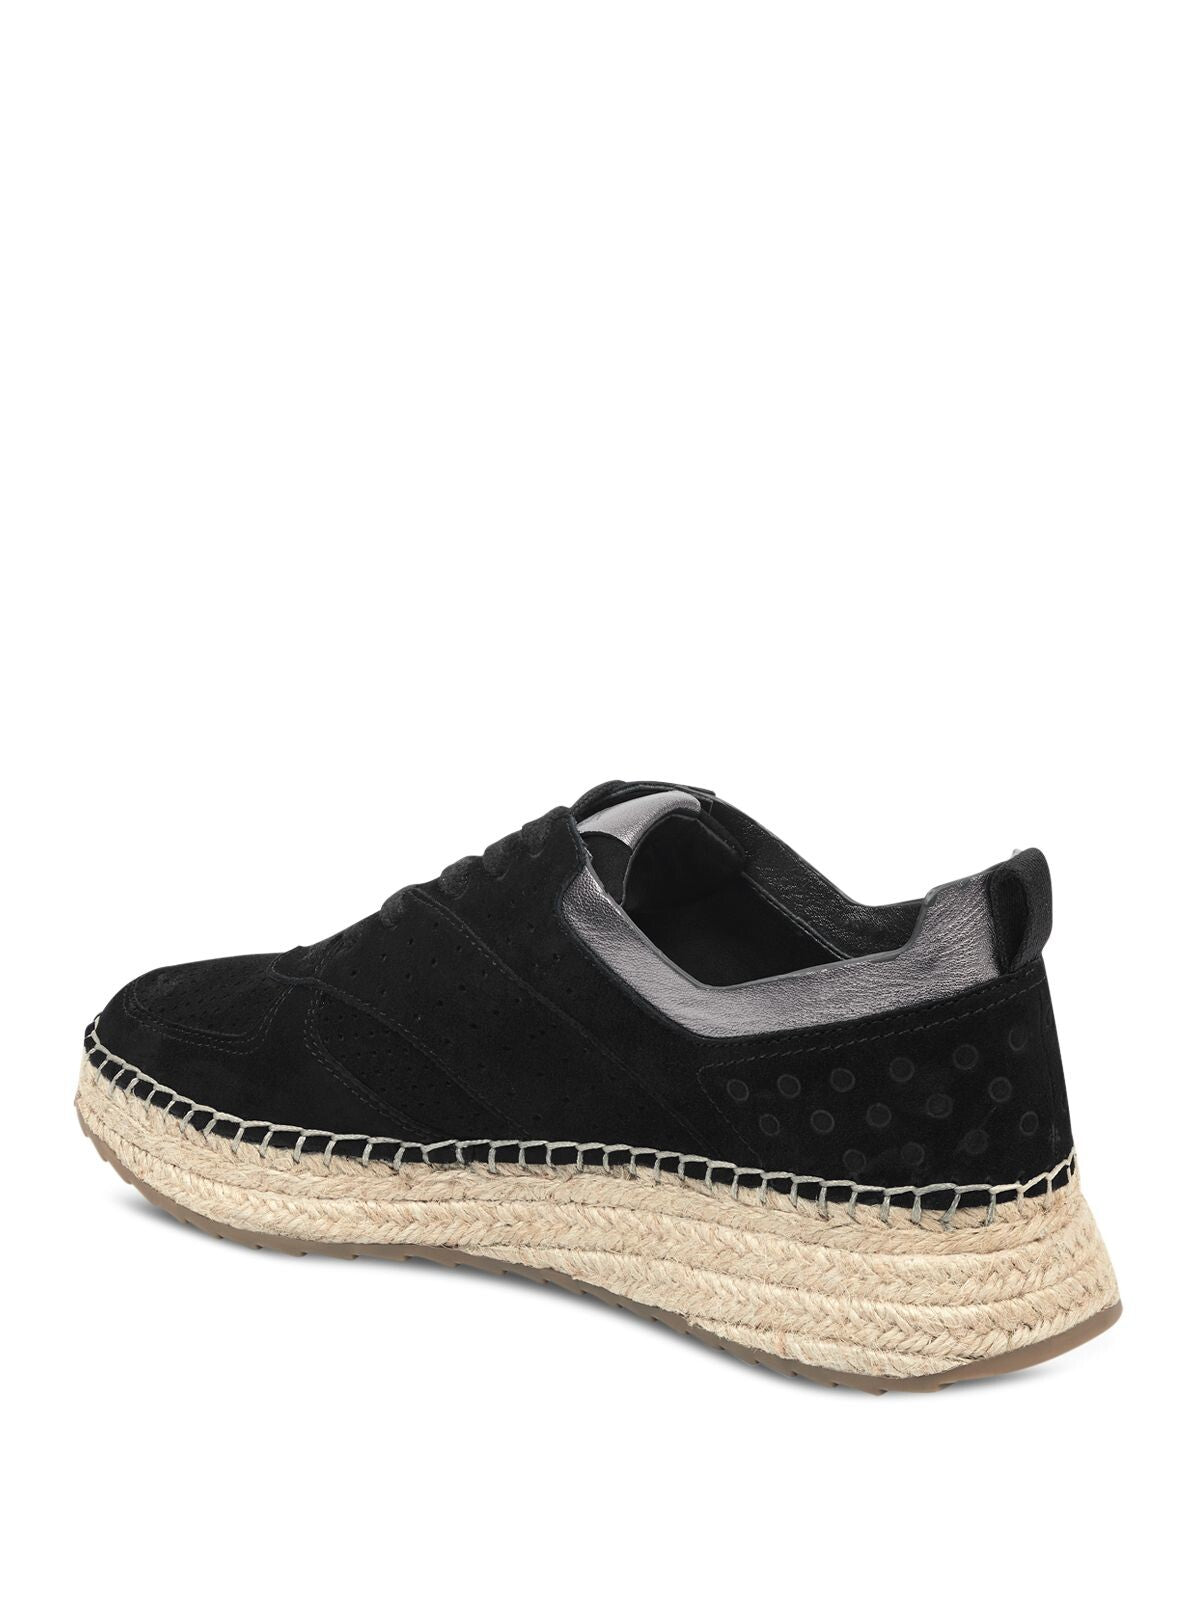 MARC FISHER Womens Black 1" Platform Espadrille Perforated Treaded Julio Round Toe Wedge Lace-Up Leather Athletic Sneakers Shoes M